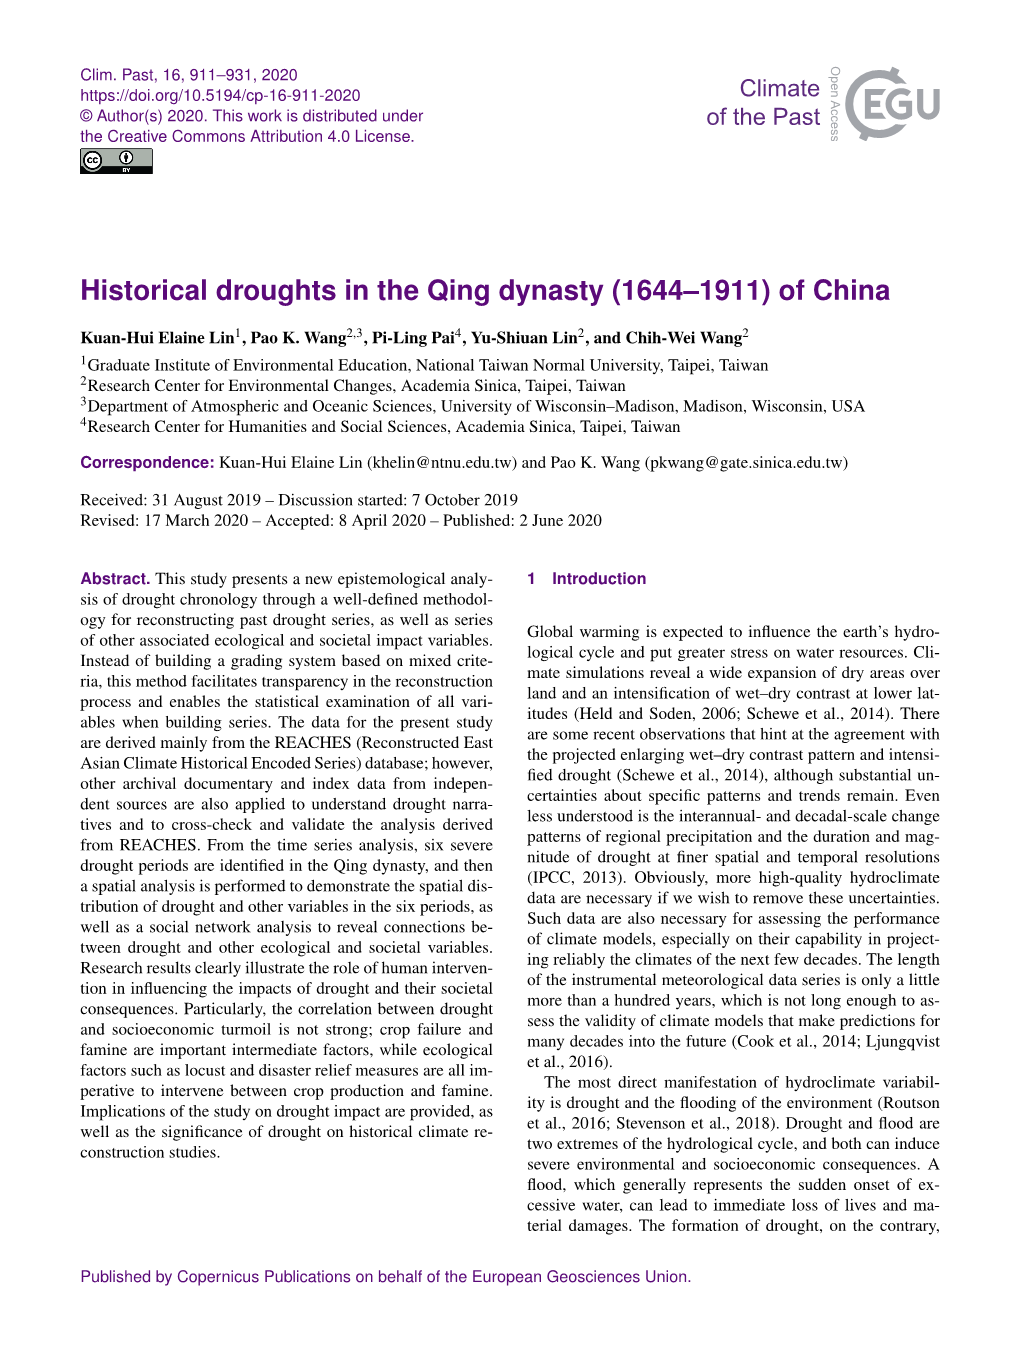 Historical Droughts in the Qing Dynasty (1644–1911) of China